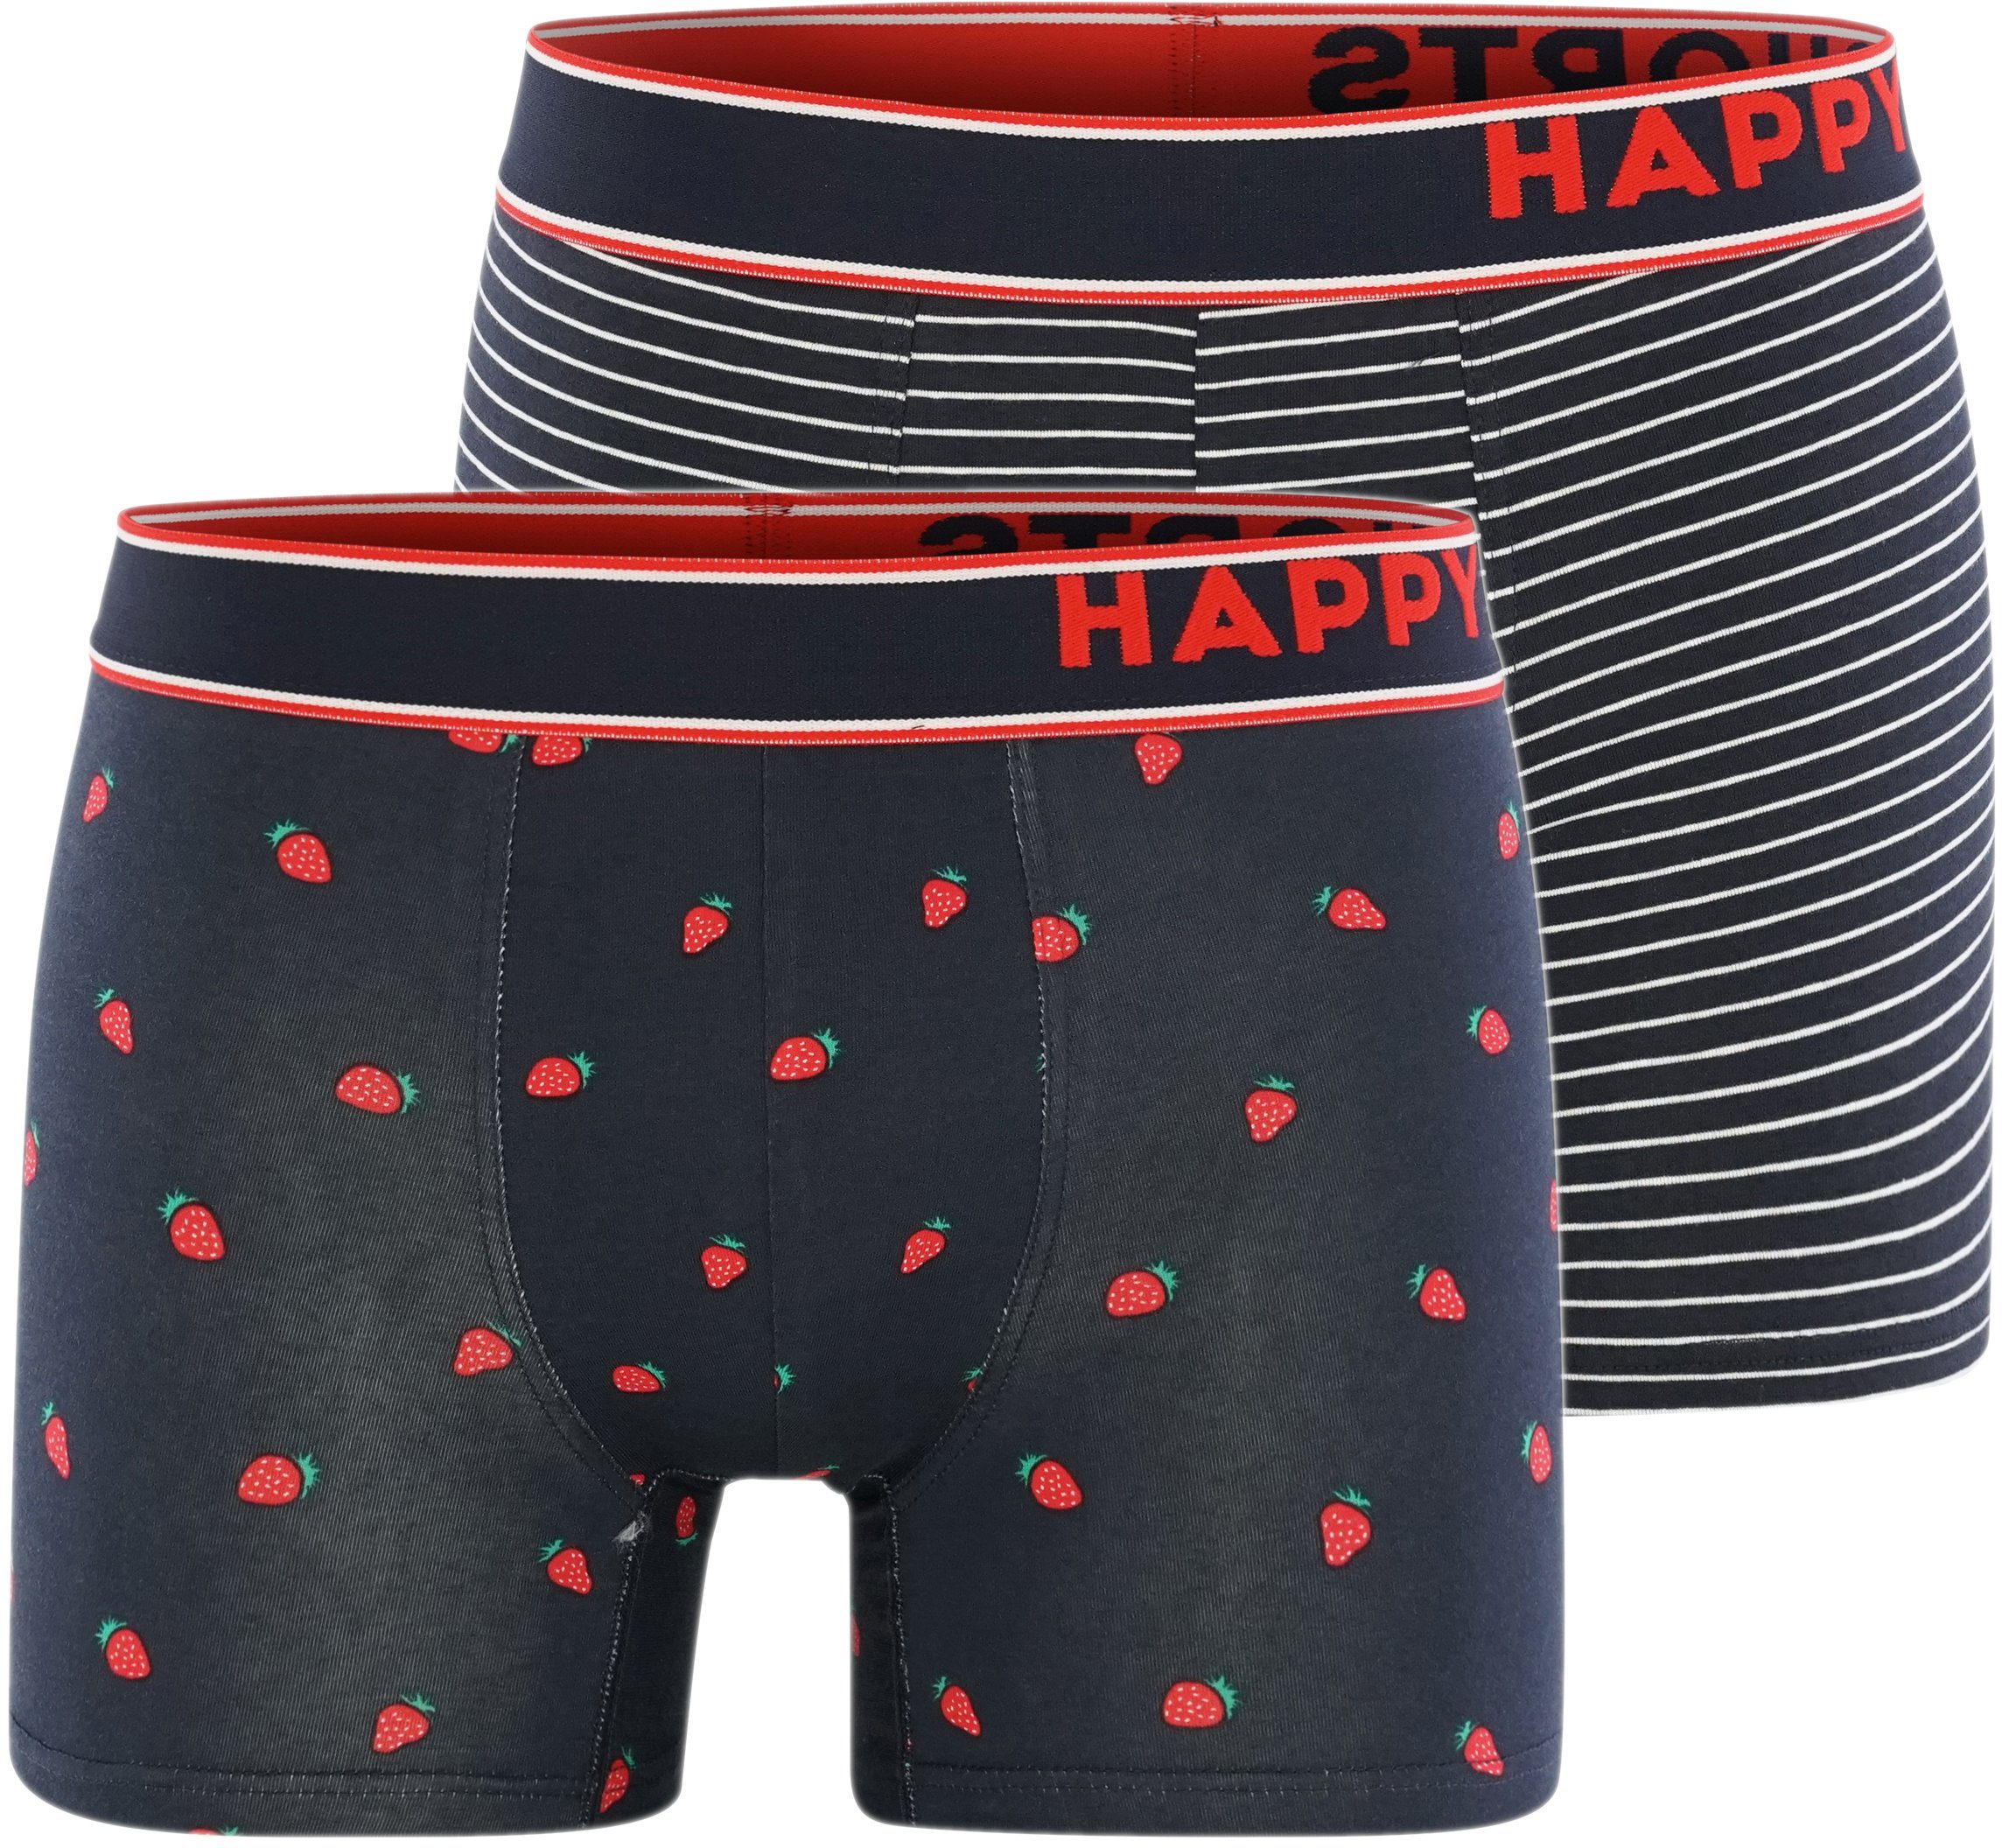 and 2-Pack SHORTS Retro HAPPY Pants Strawberries Trunks (2-St) Stripe